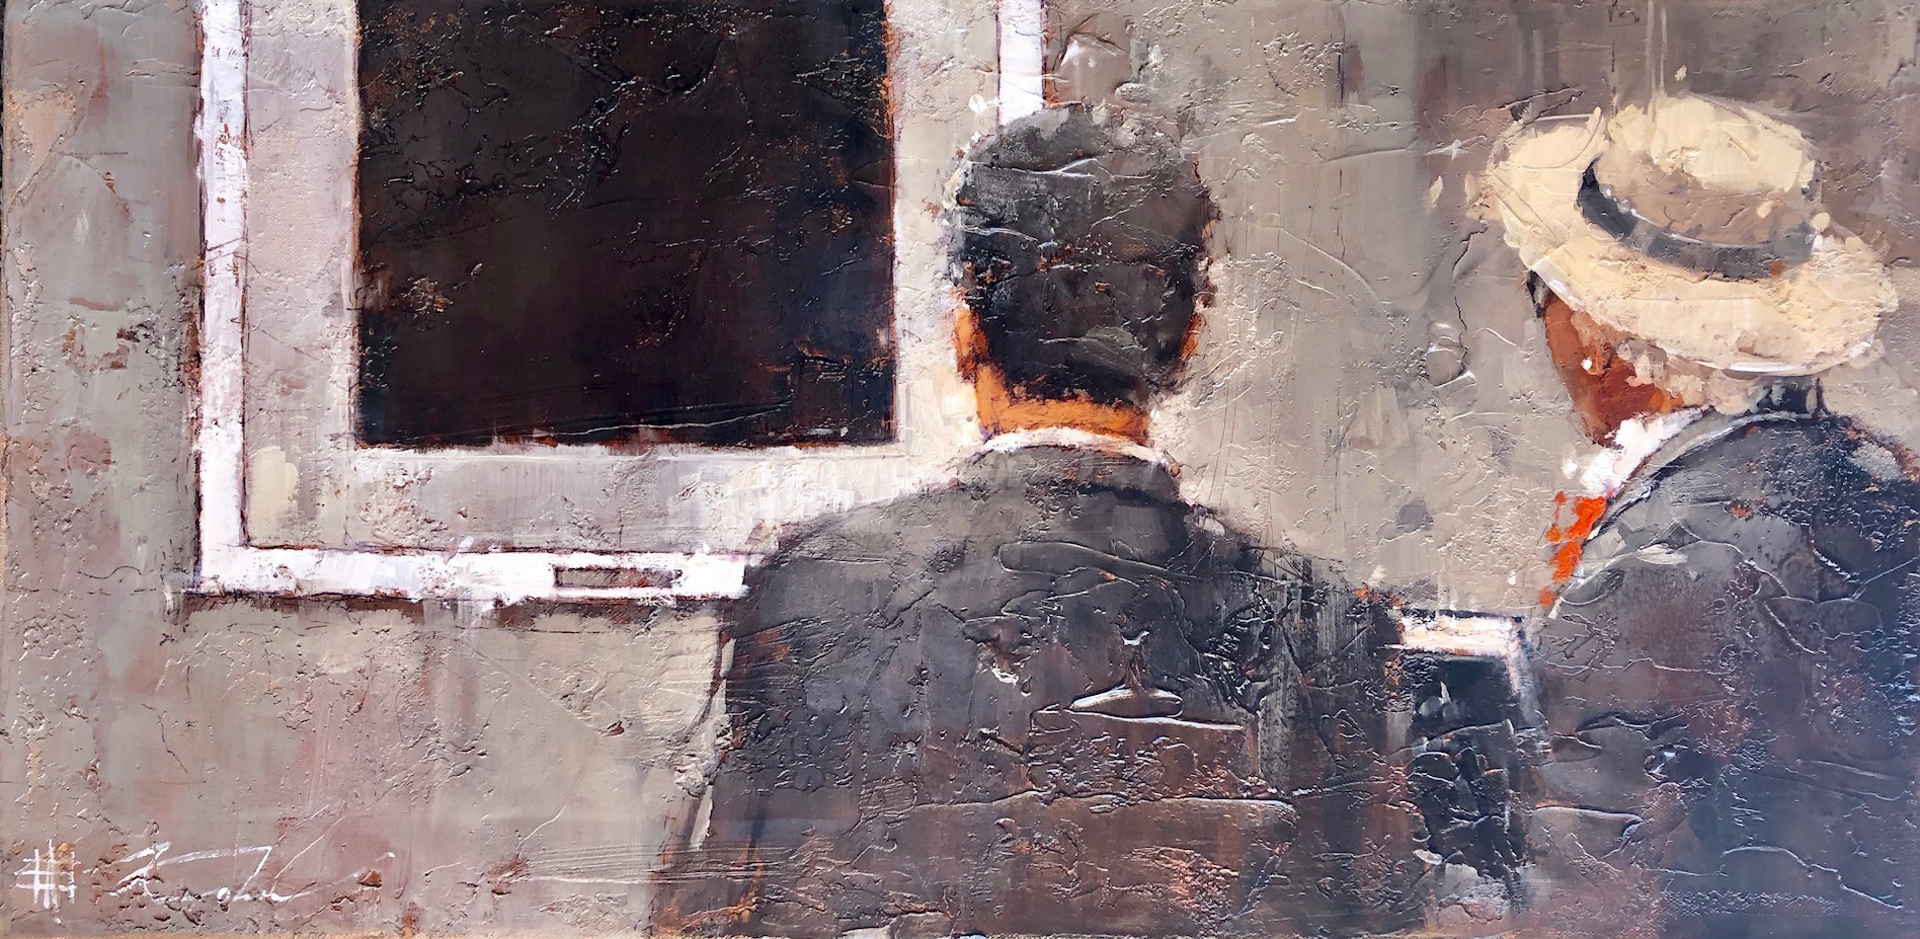 "The Connoisseurs" series #14 by Andre Kohn